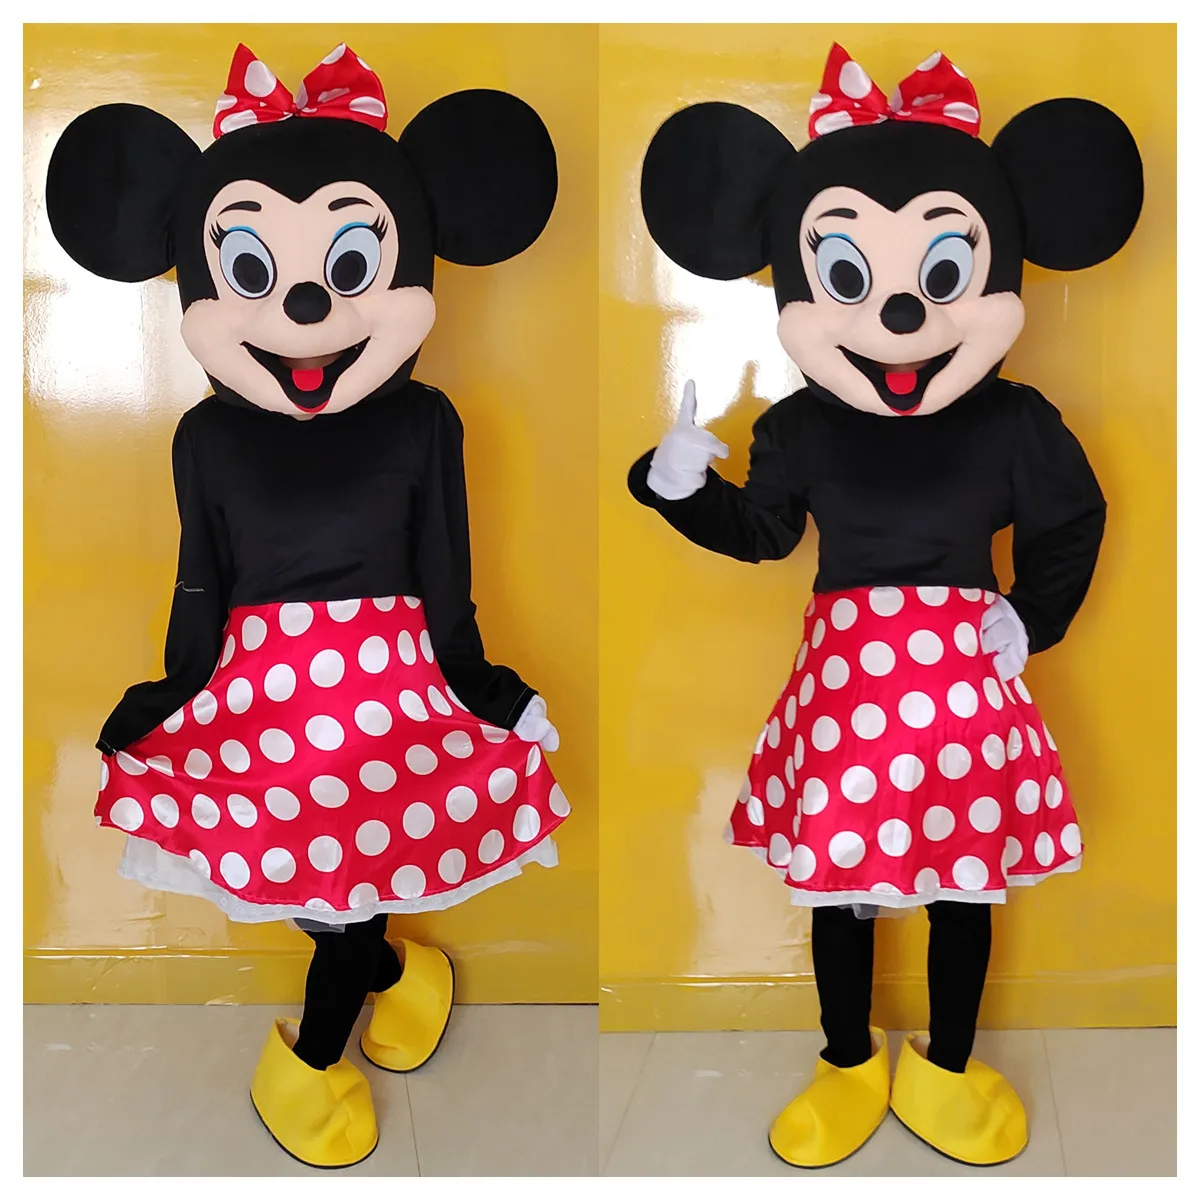 

[1 set] Disney Minnie and Winnie the Pooh cartoon character costume mascot costume advertising costume party costume animal toy